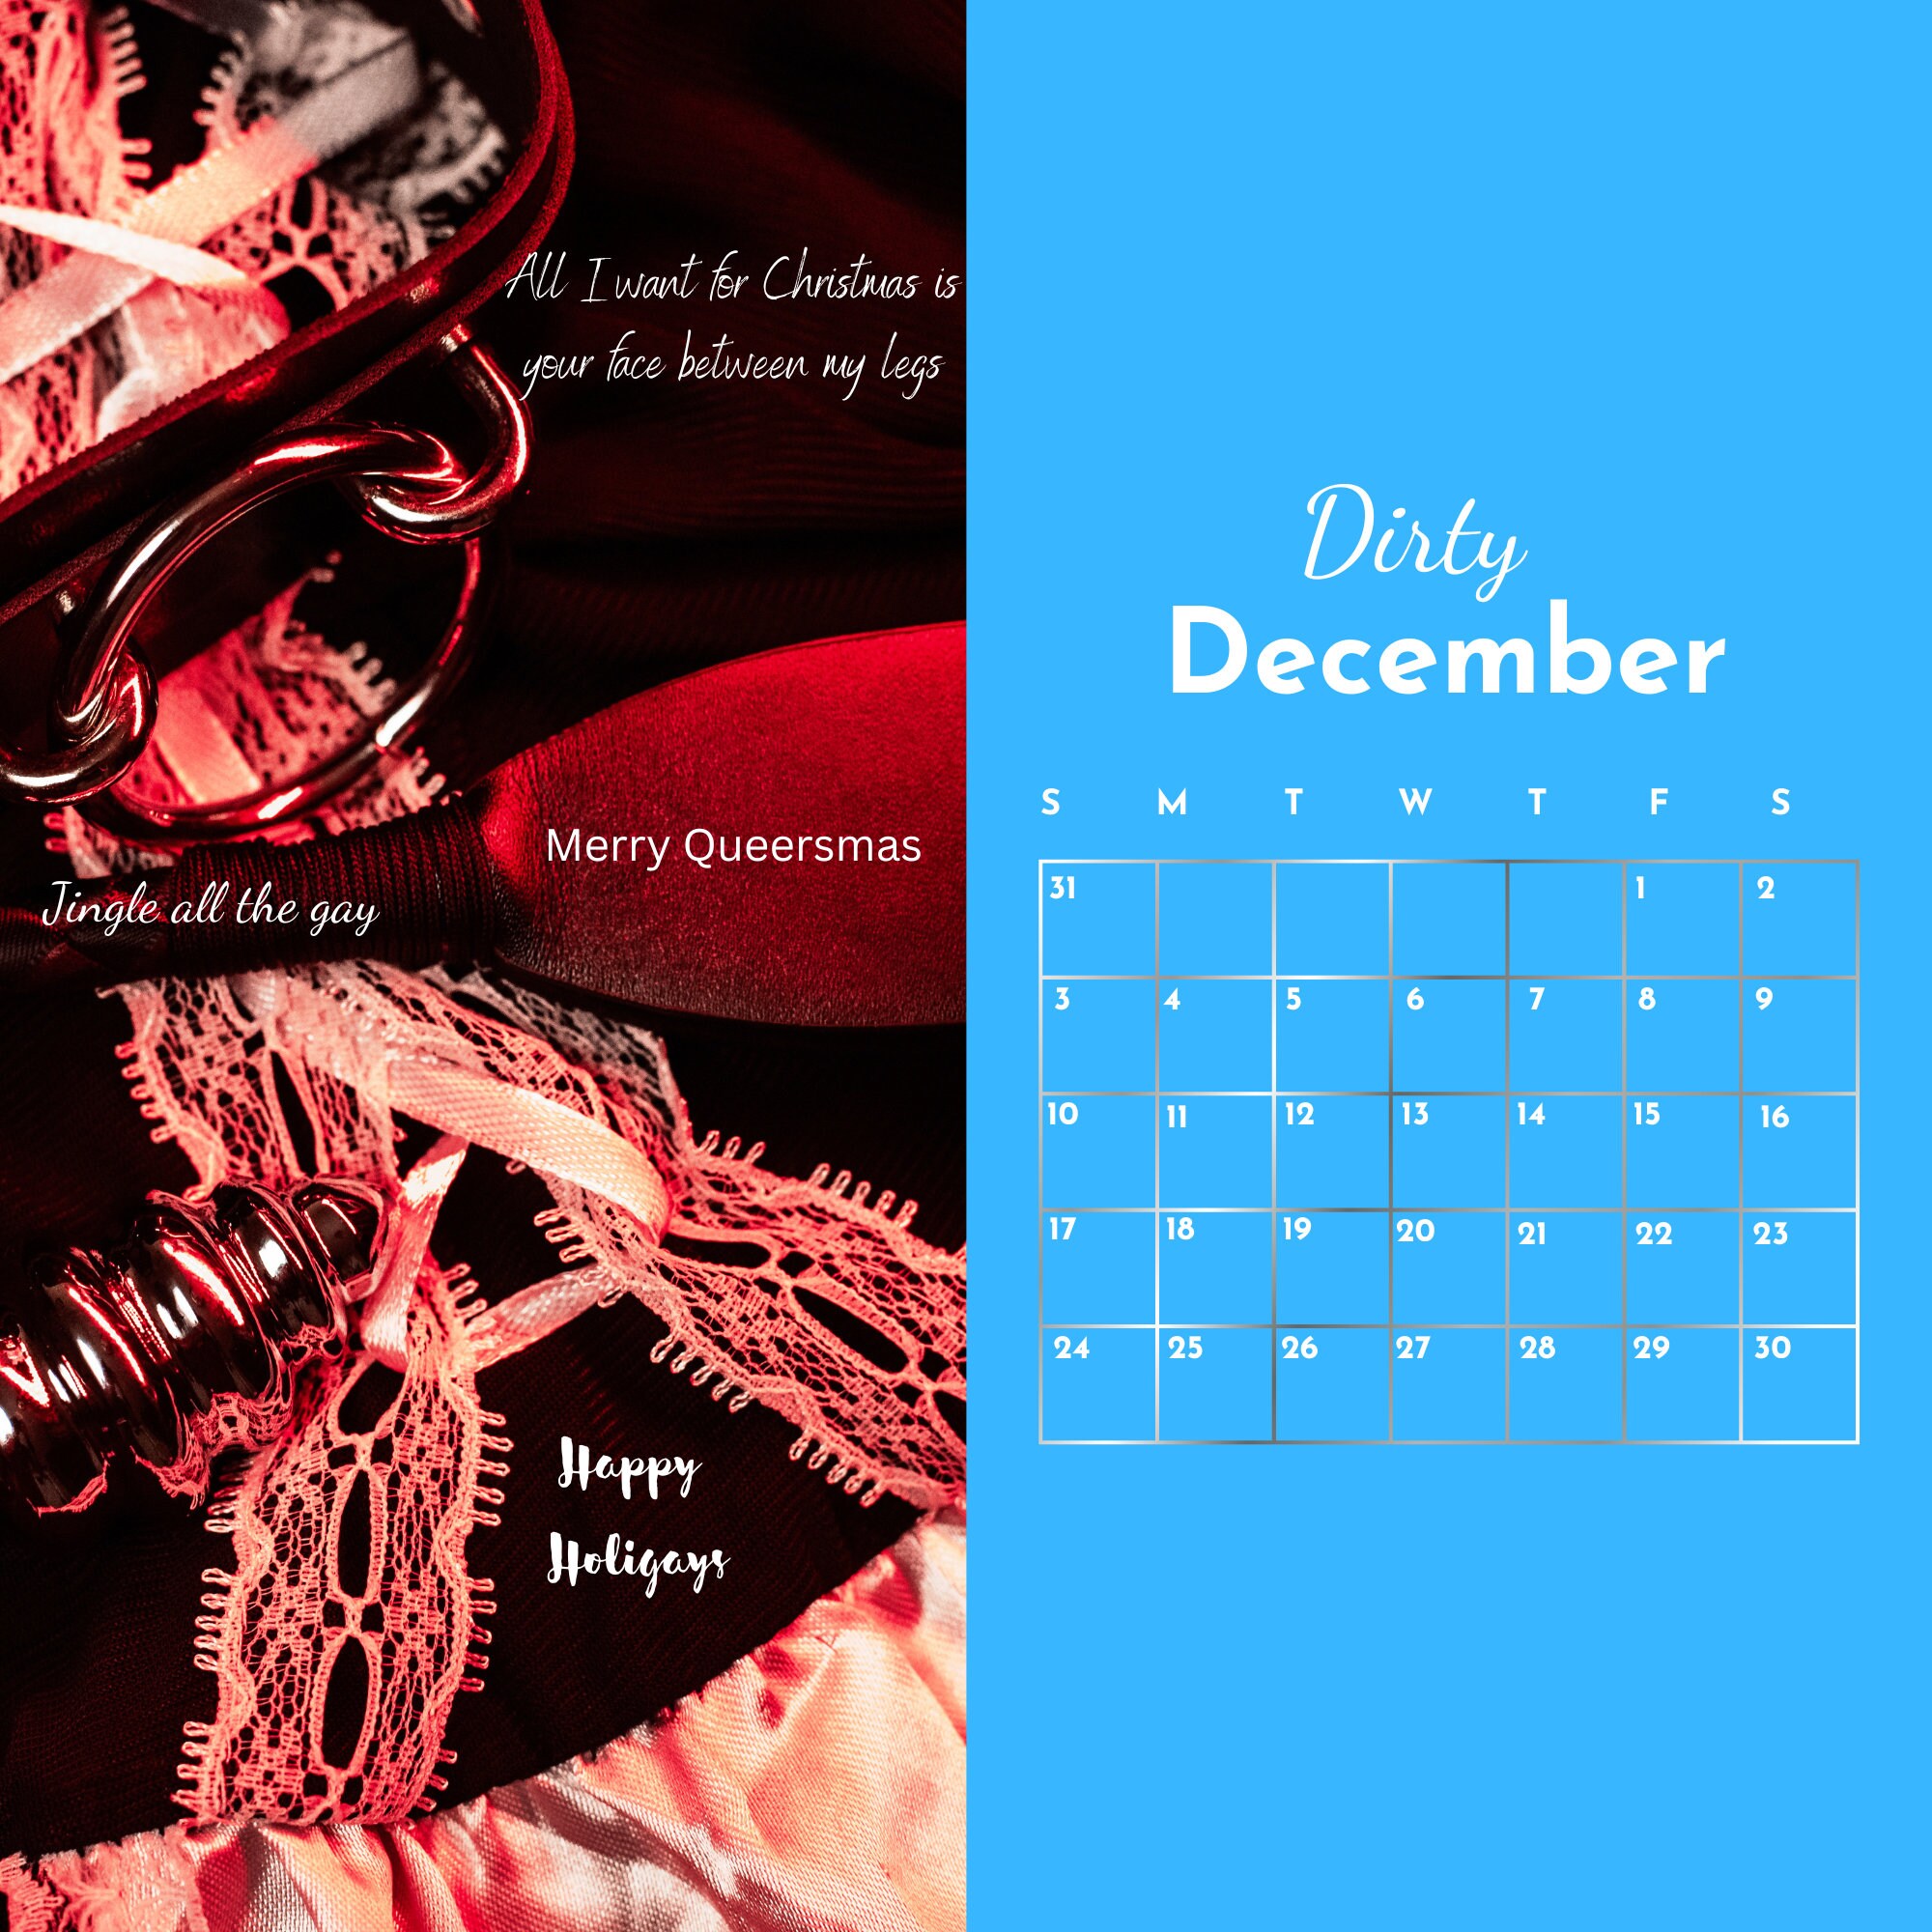 The Lesbian Calendar Of The Year Etsy